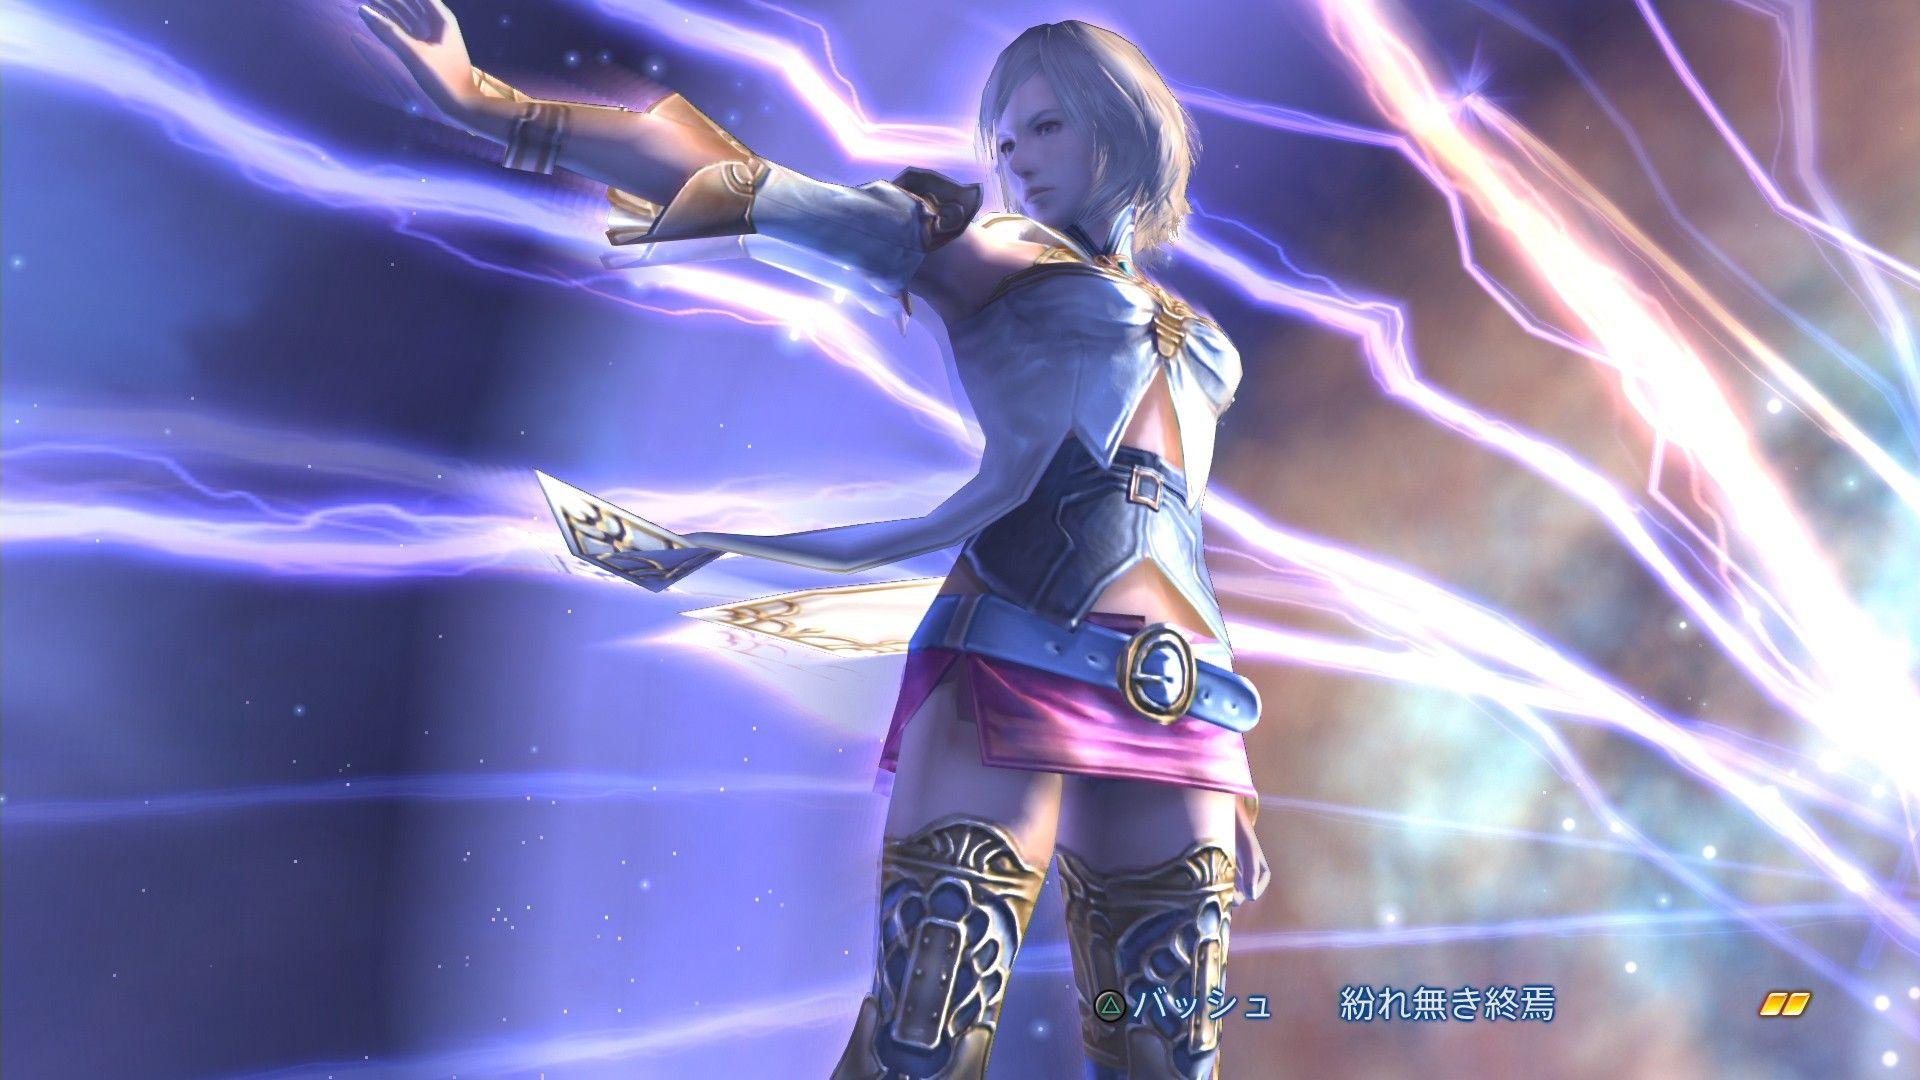 PS4 Exclusive Final Fantasy XII: The Zodiac Age Gets New 1080p